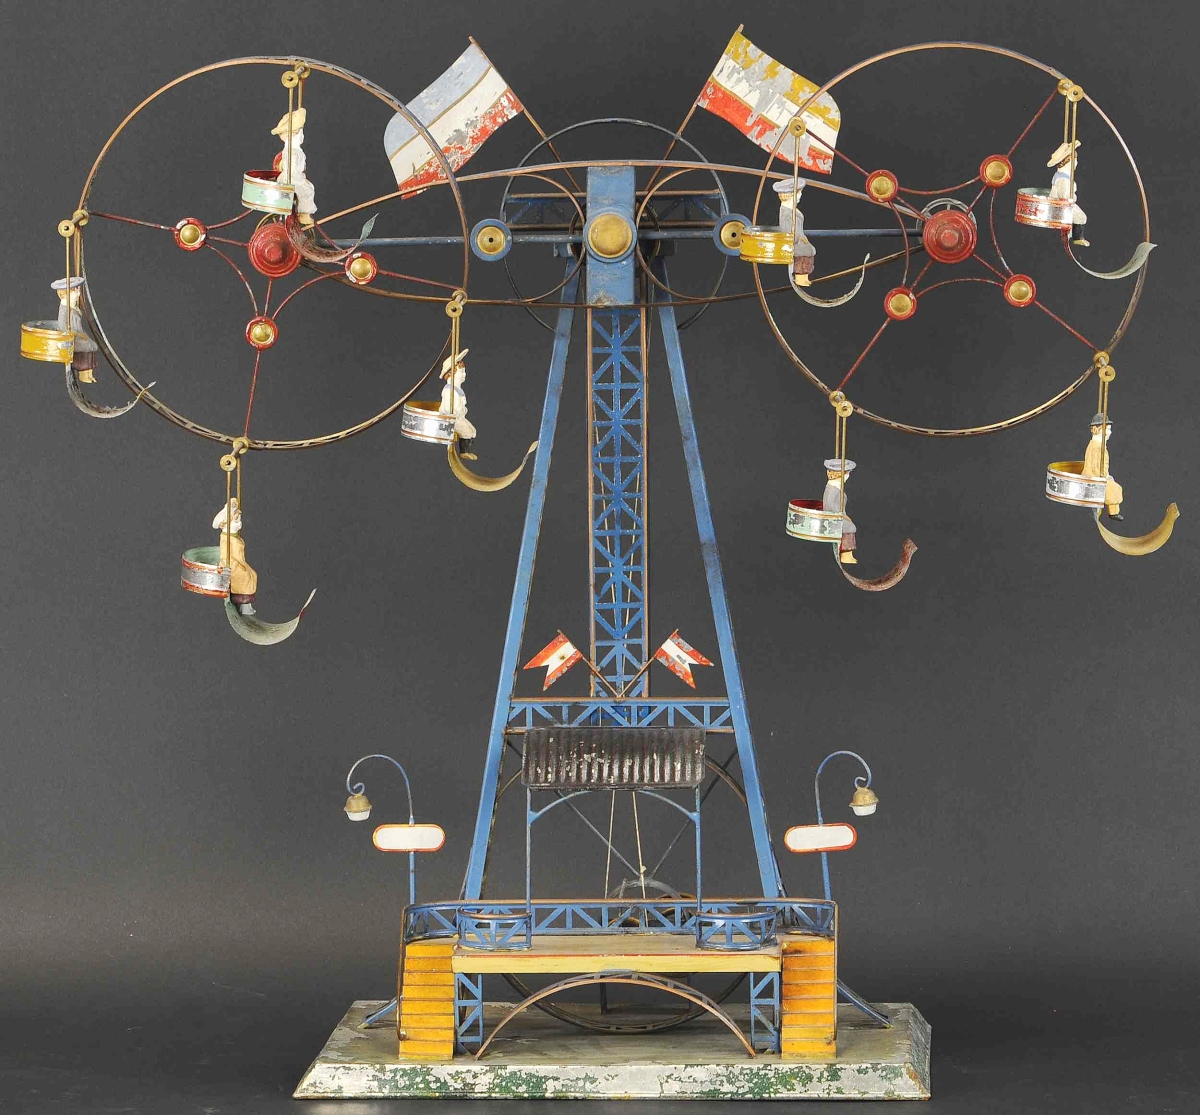 From German company Mohr & Krauss came this double Ferris wheel. It sold for $138,000.